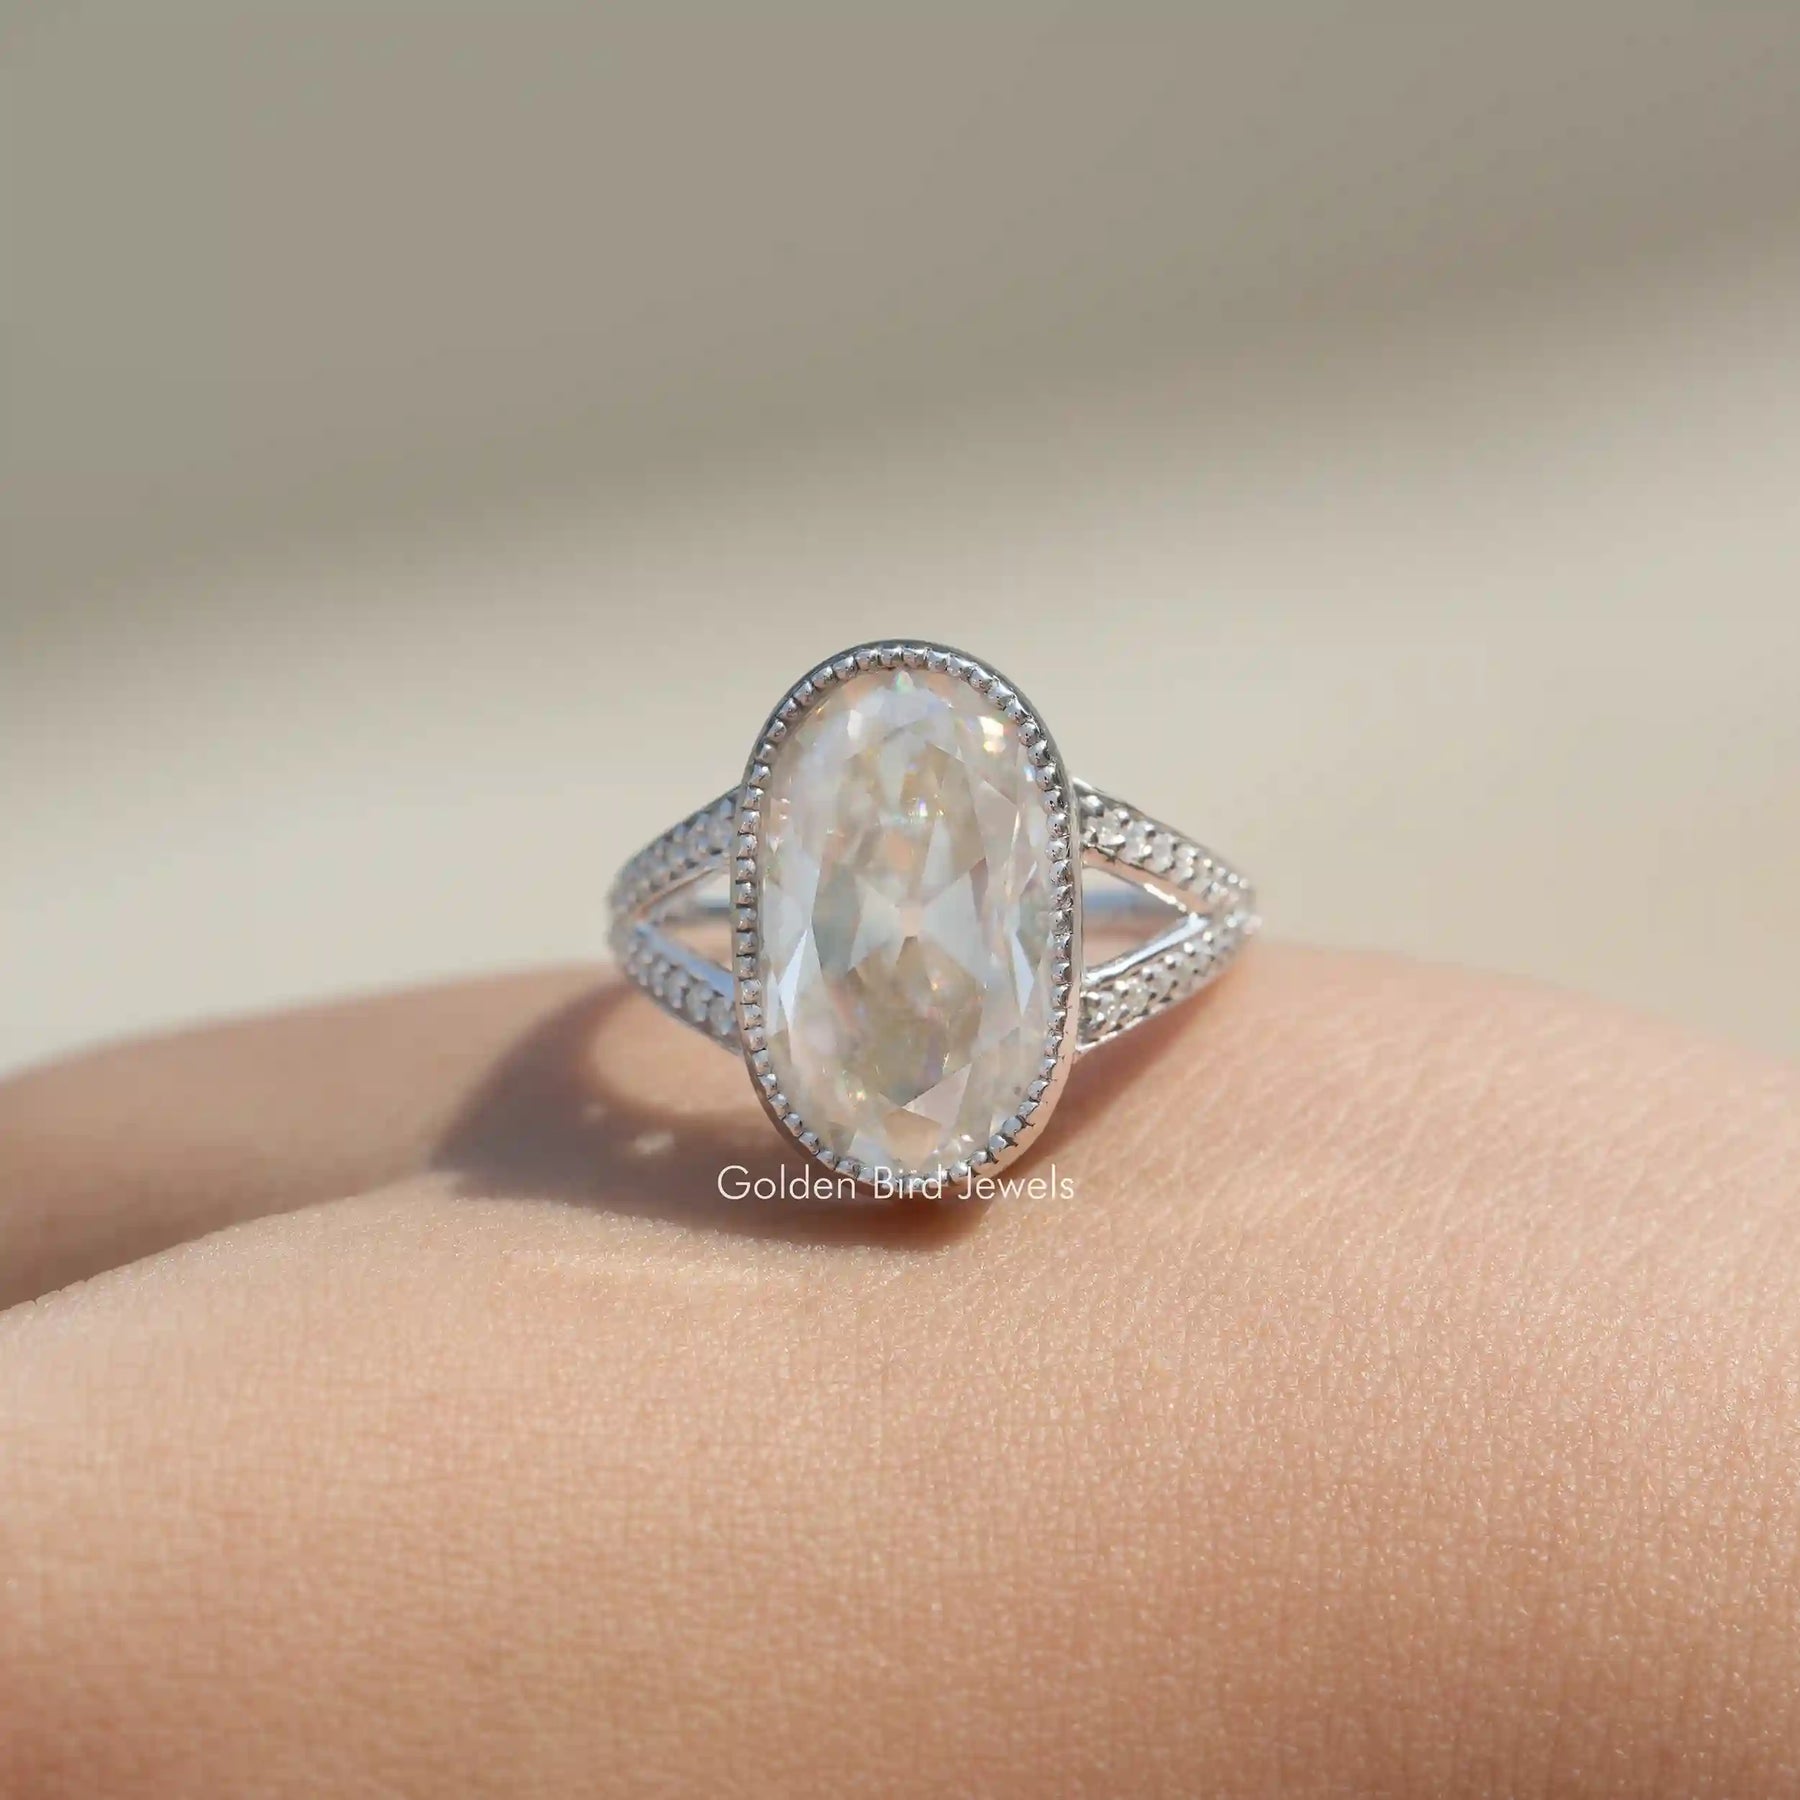 [Old Mine Oval Cut Moissanite Ring Made In 18k White Gold]-[Golden Bird Jewels]